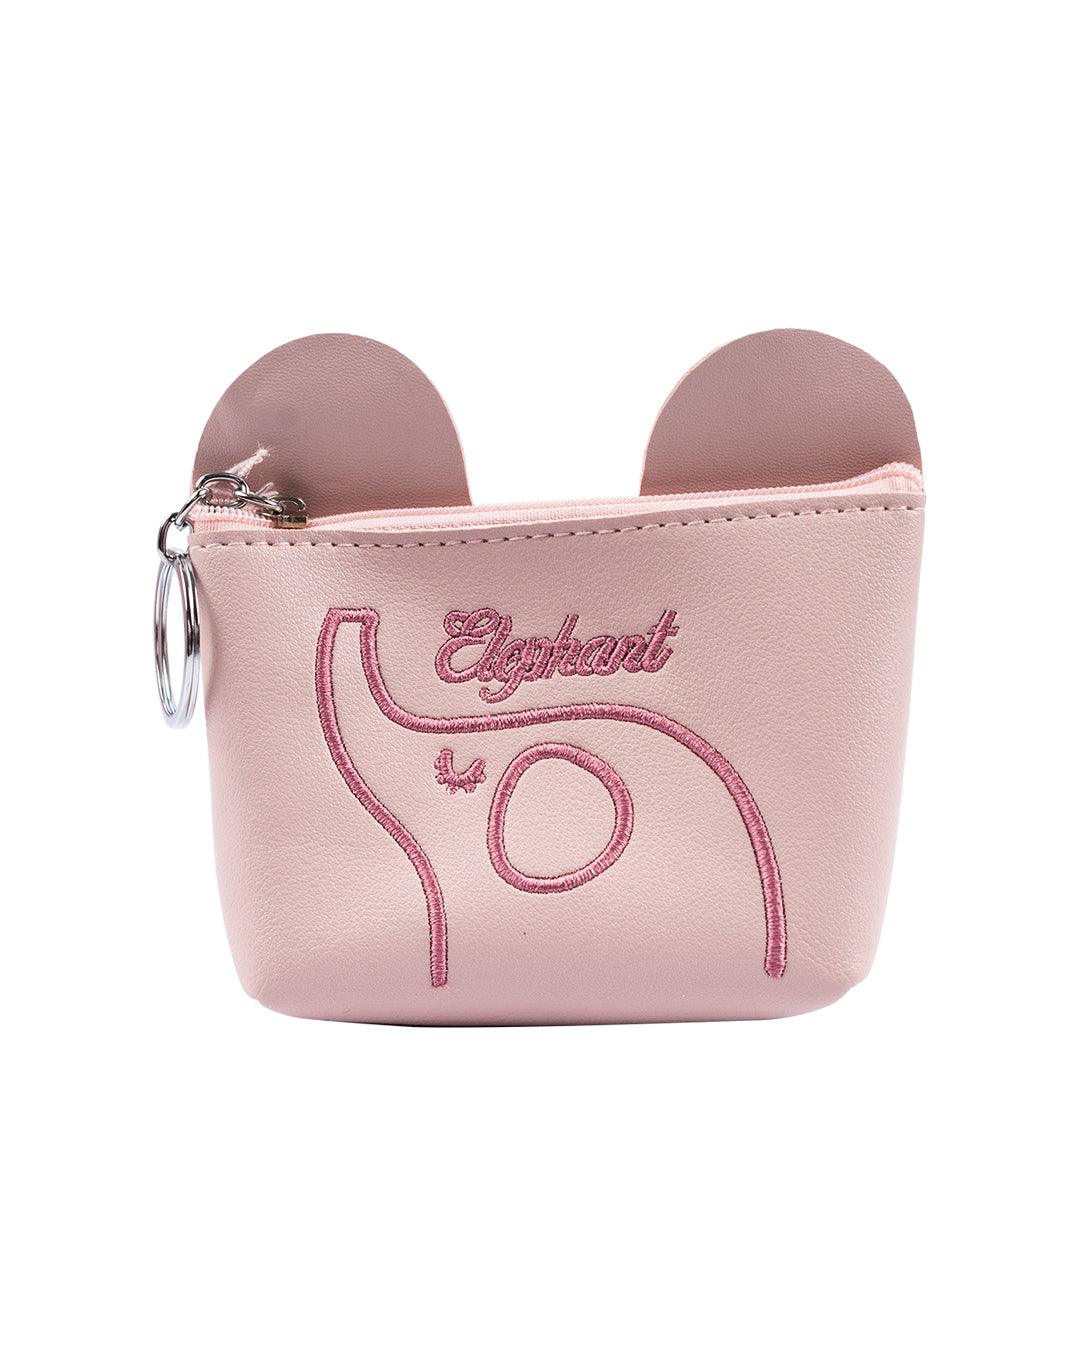 Donati Coin Pouch, Elephant Print, Pink, PU Leather - MARKET 99